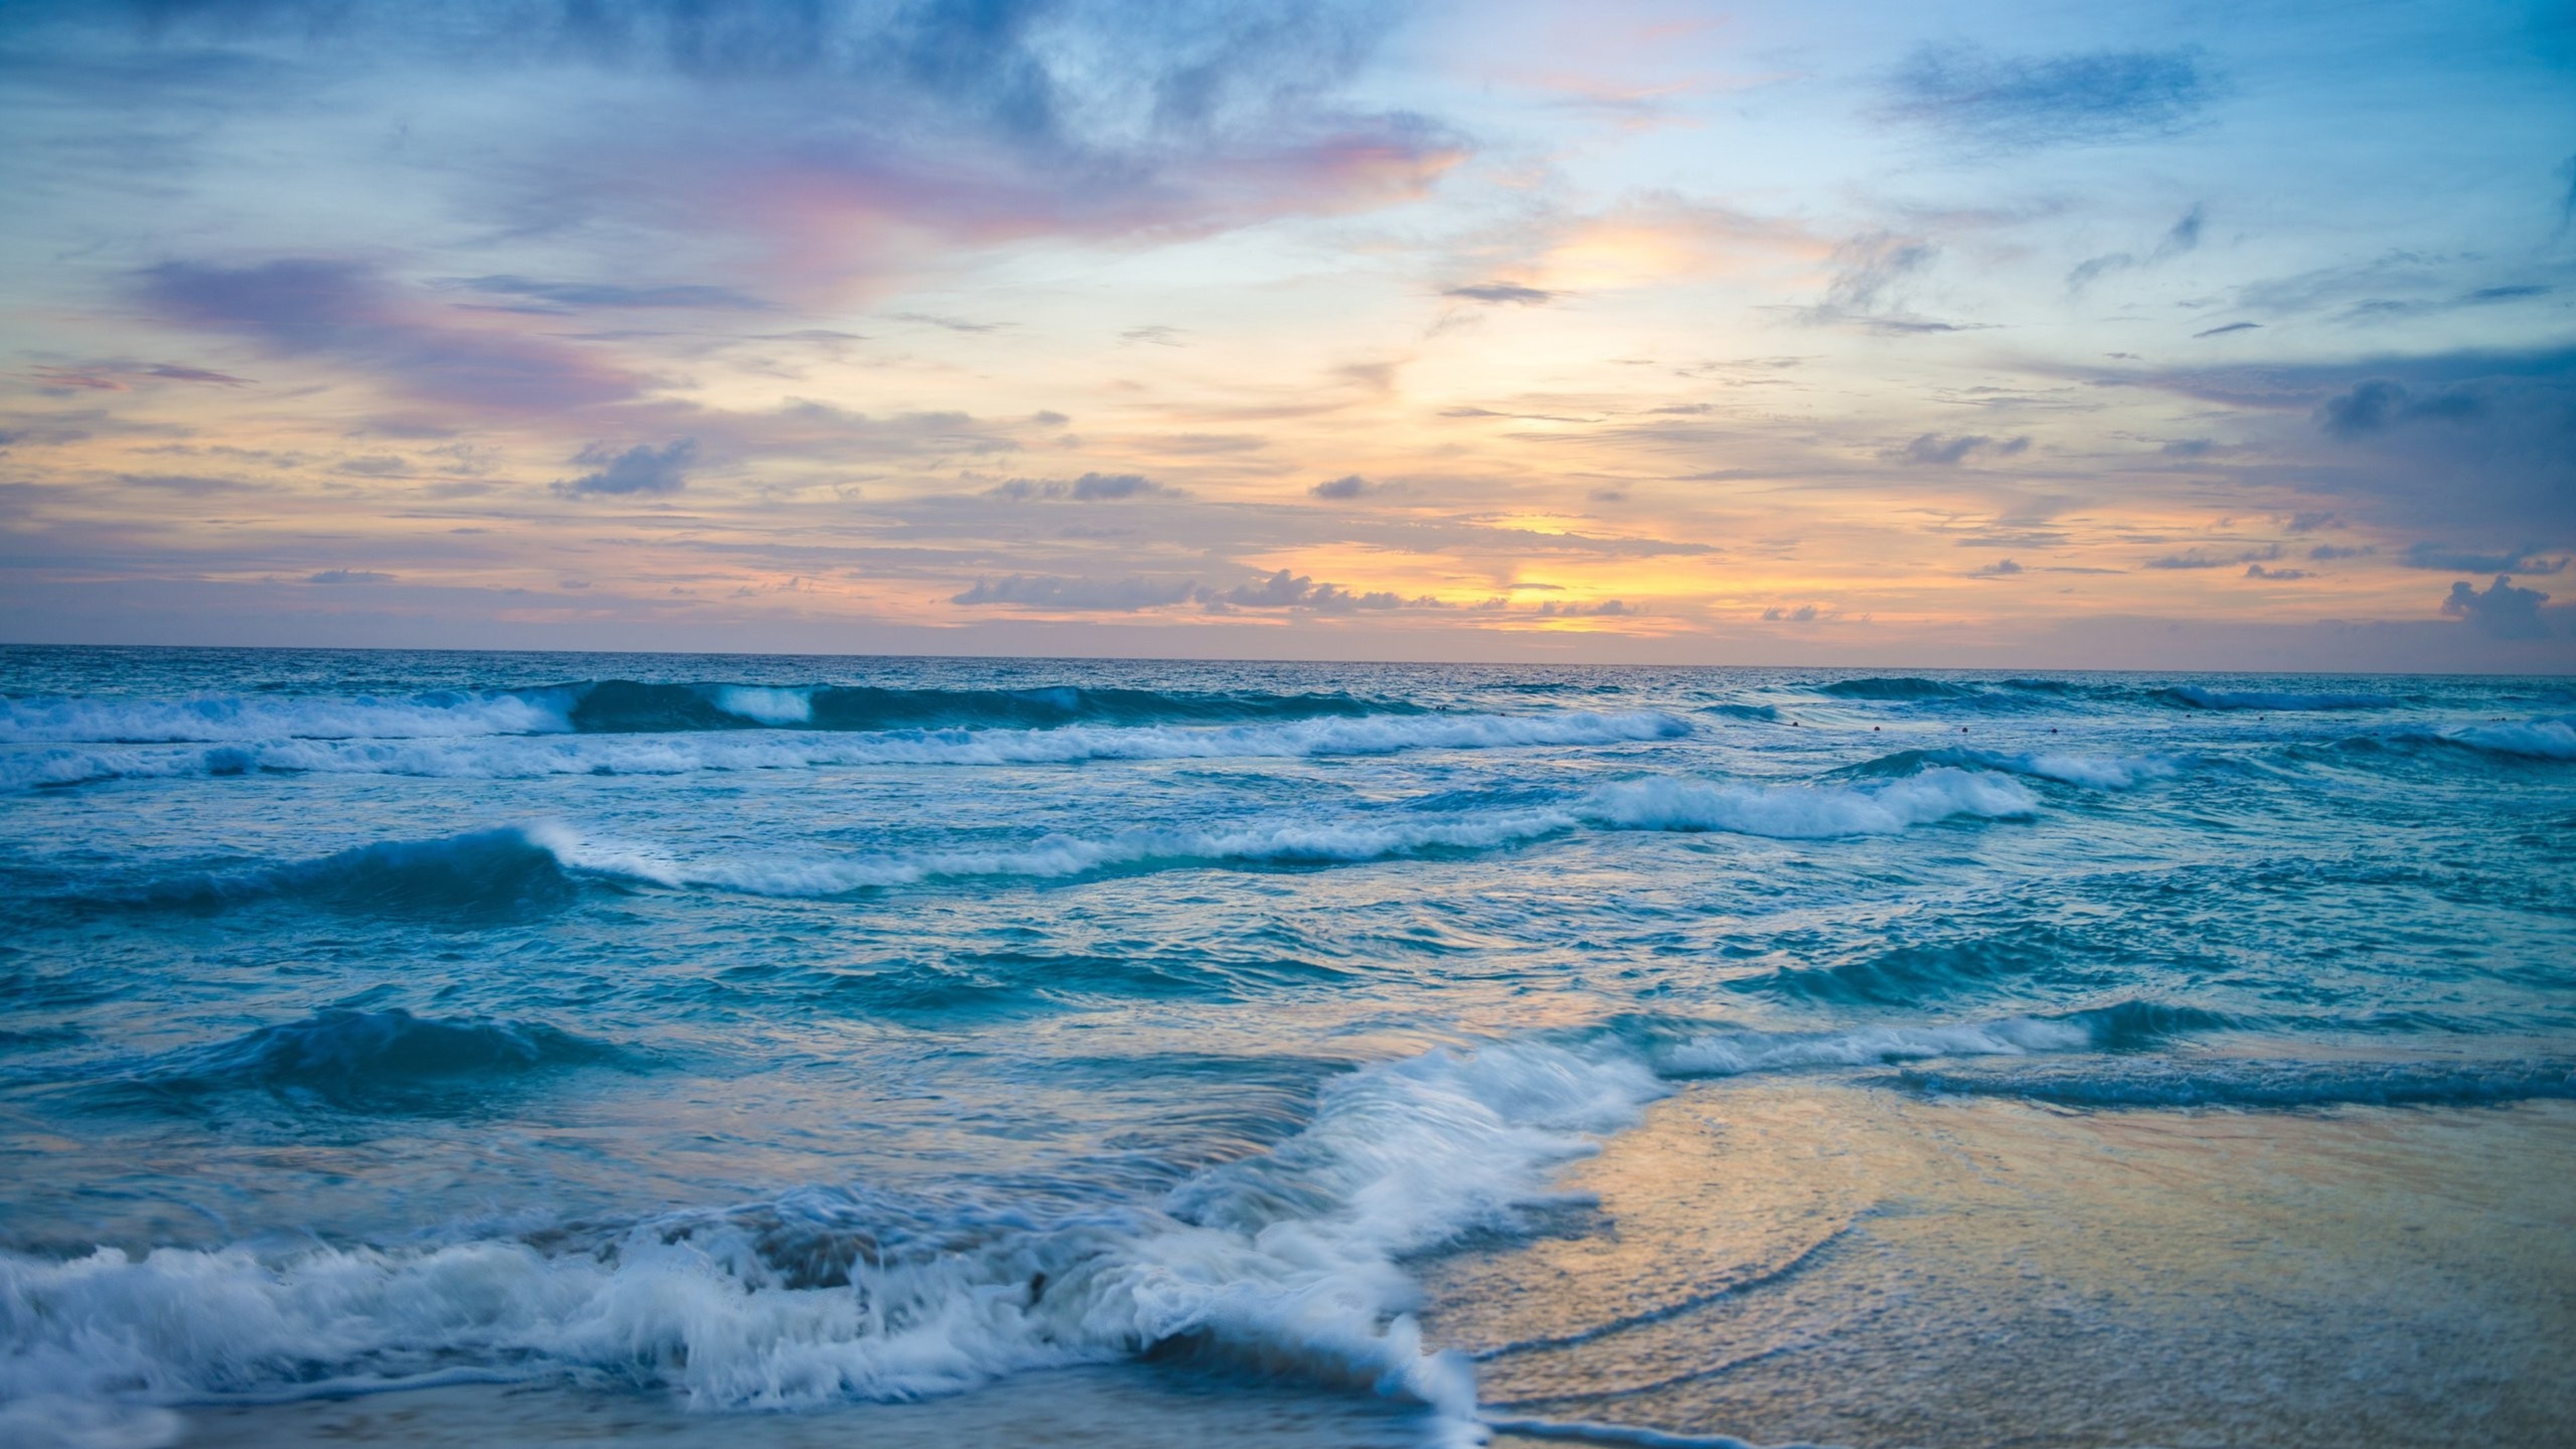 Ocean Waves At Sunset Hd Nature 4k Wallpapers Images Backgrounds Photos And Pictures